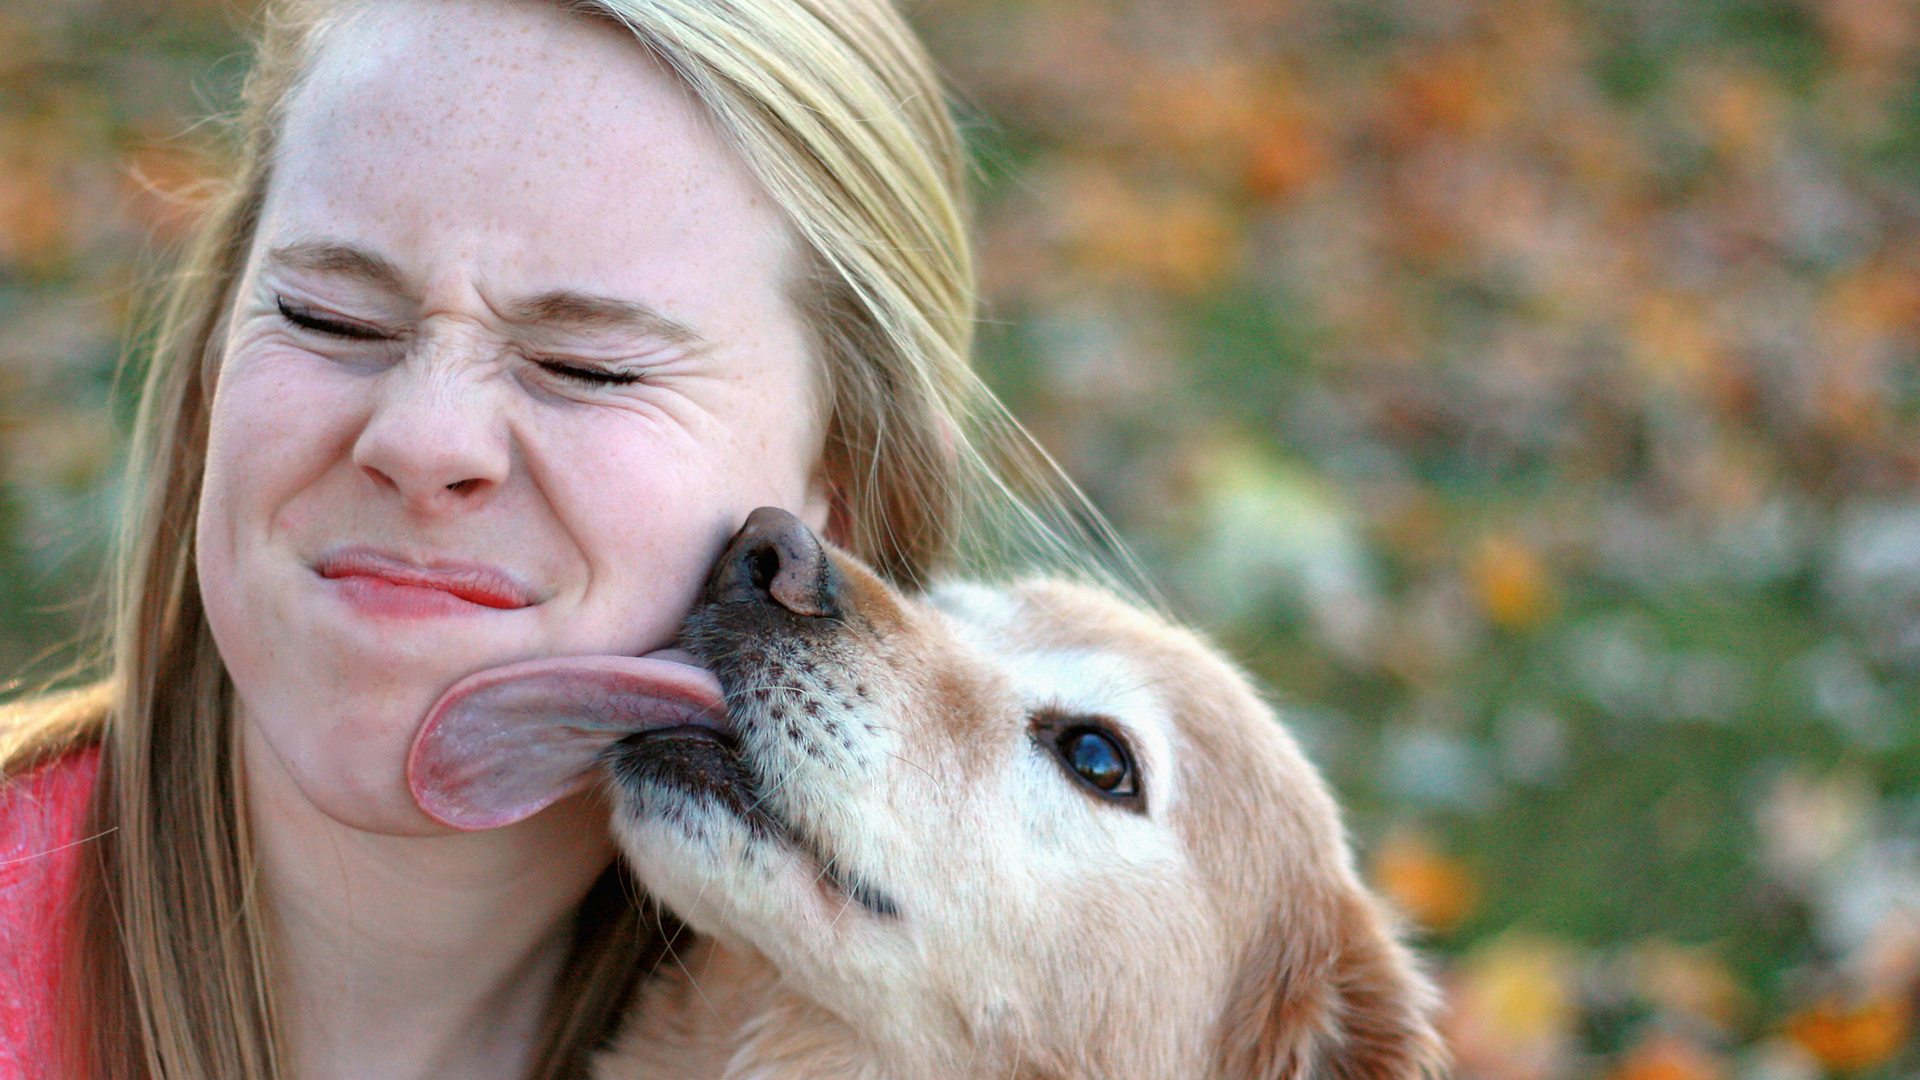 The deadly reason why you shouldn't let dogs lick your face